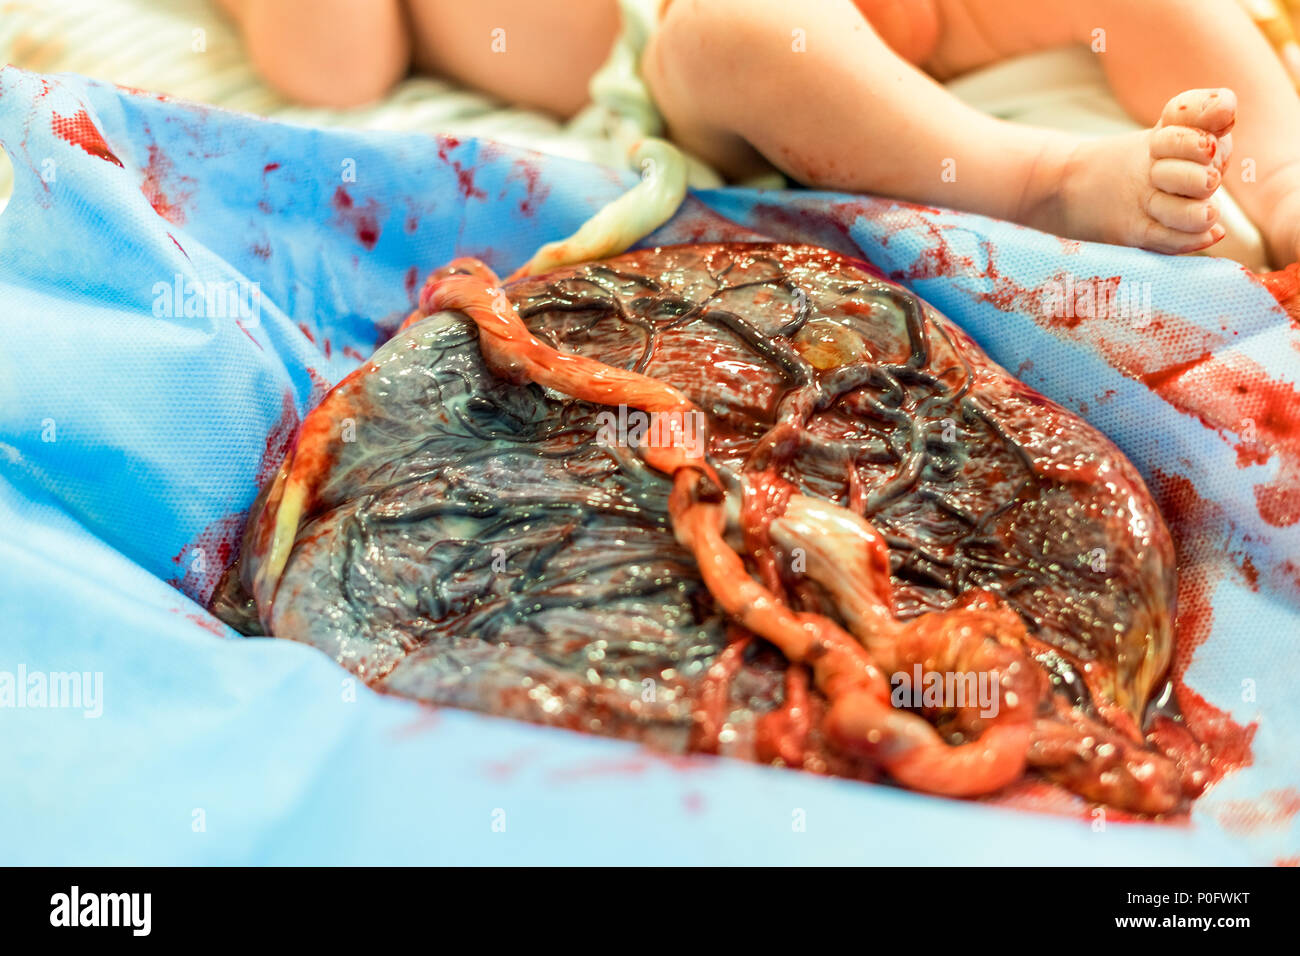 Placenta outside uterus just after childbirth and the baby in the background Stock Photo